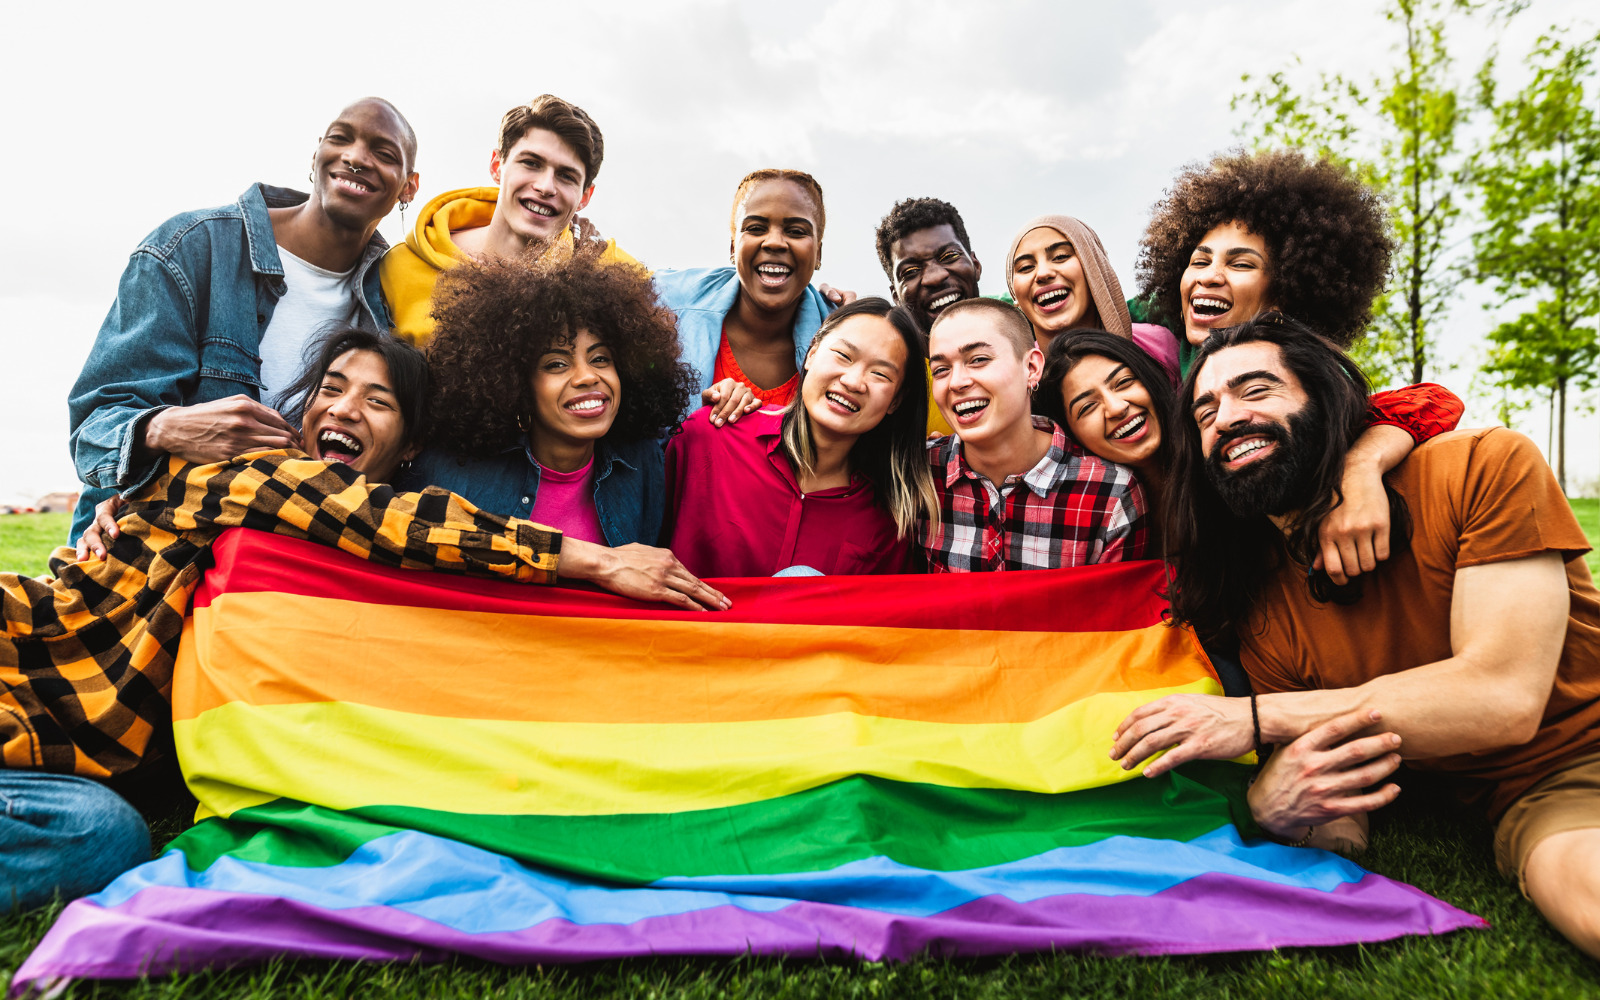 Lgbtq Representation In The Workplace Where Are Our Queer Leaders Inclusive Employers